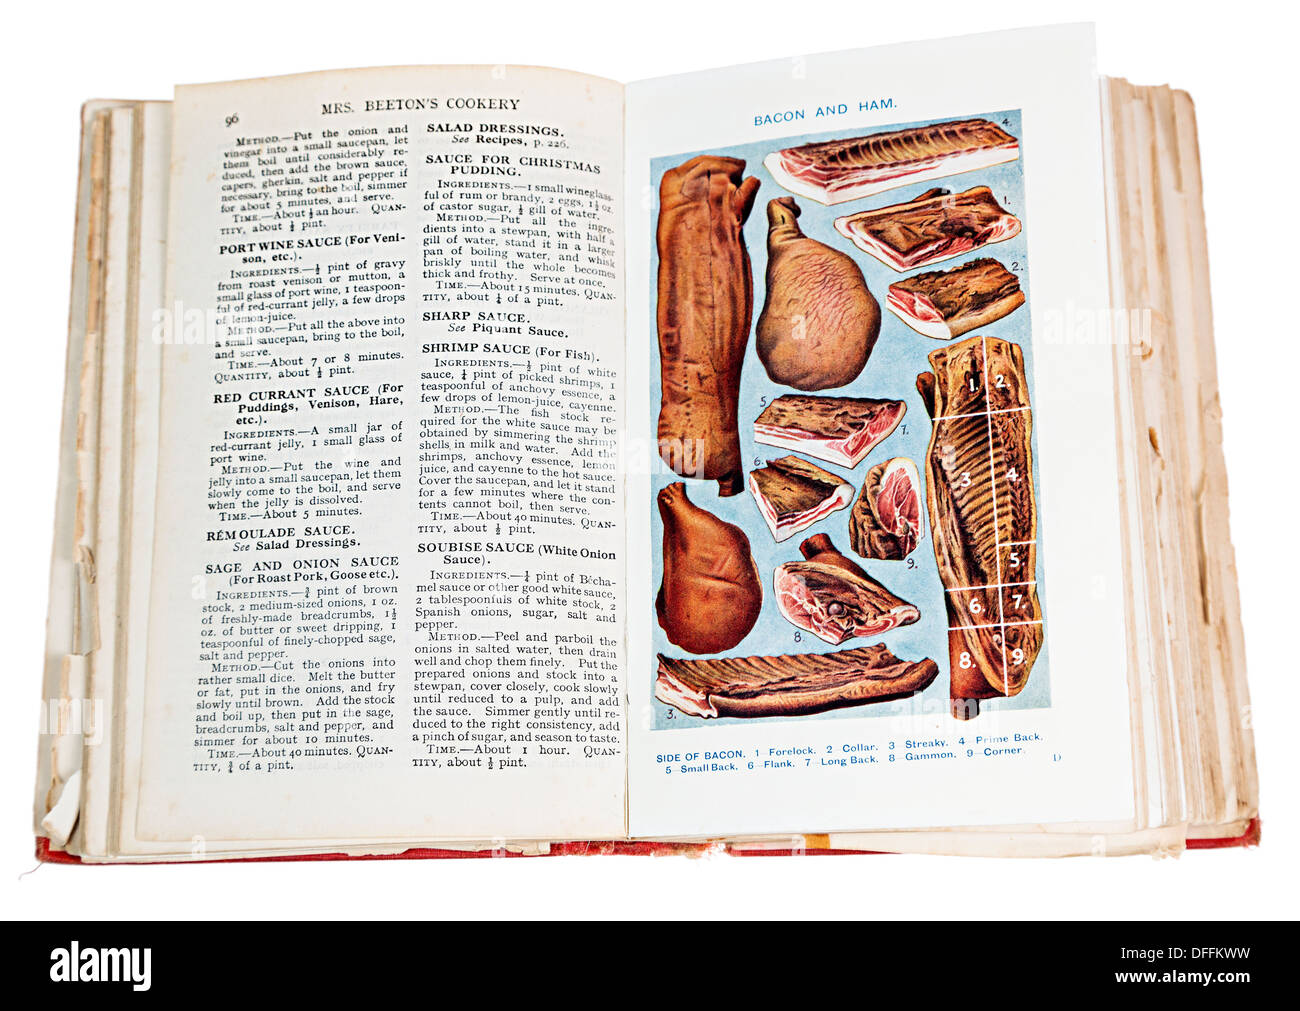 Mrs Beaton's Cookery Book 1923 edition open at page showing cuts of meat Stock Photo